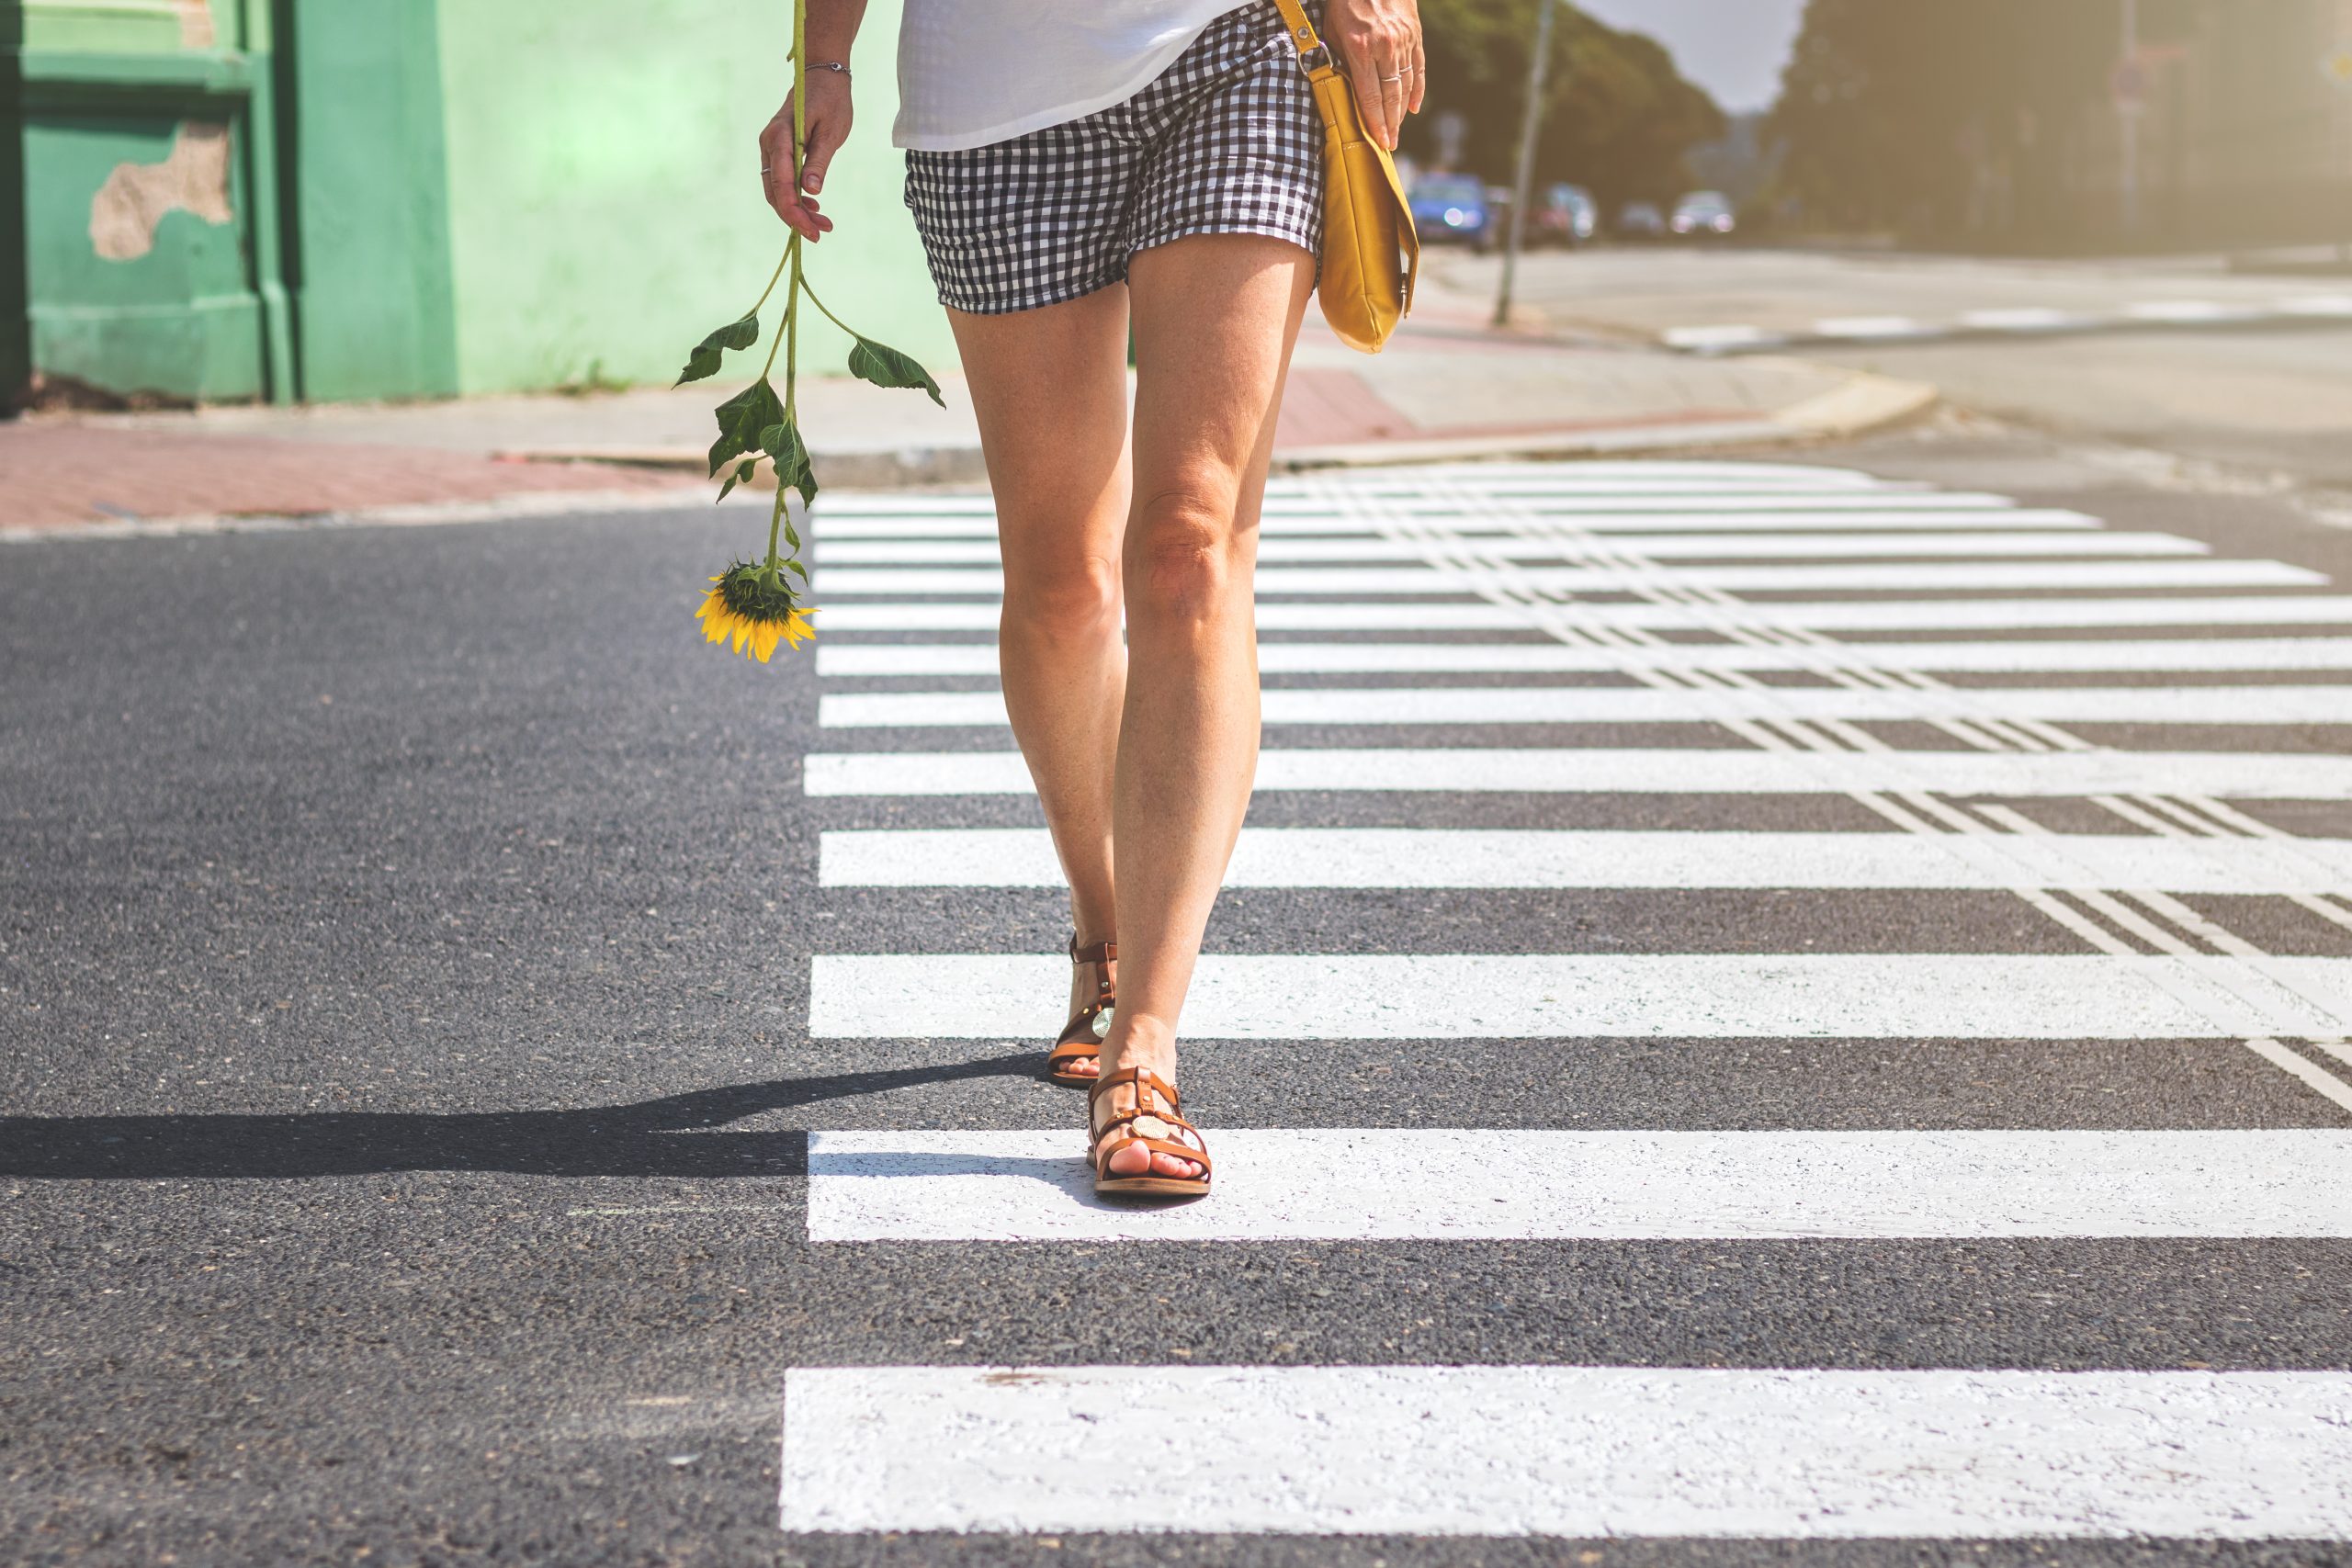 spider veins; Legs of young woman wearing shorts and sandals is crossing street on zebra marking.